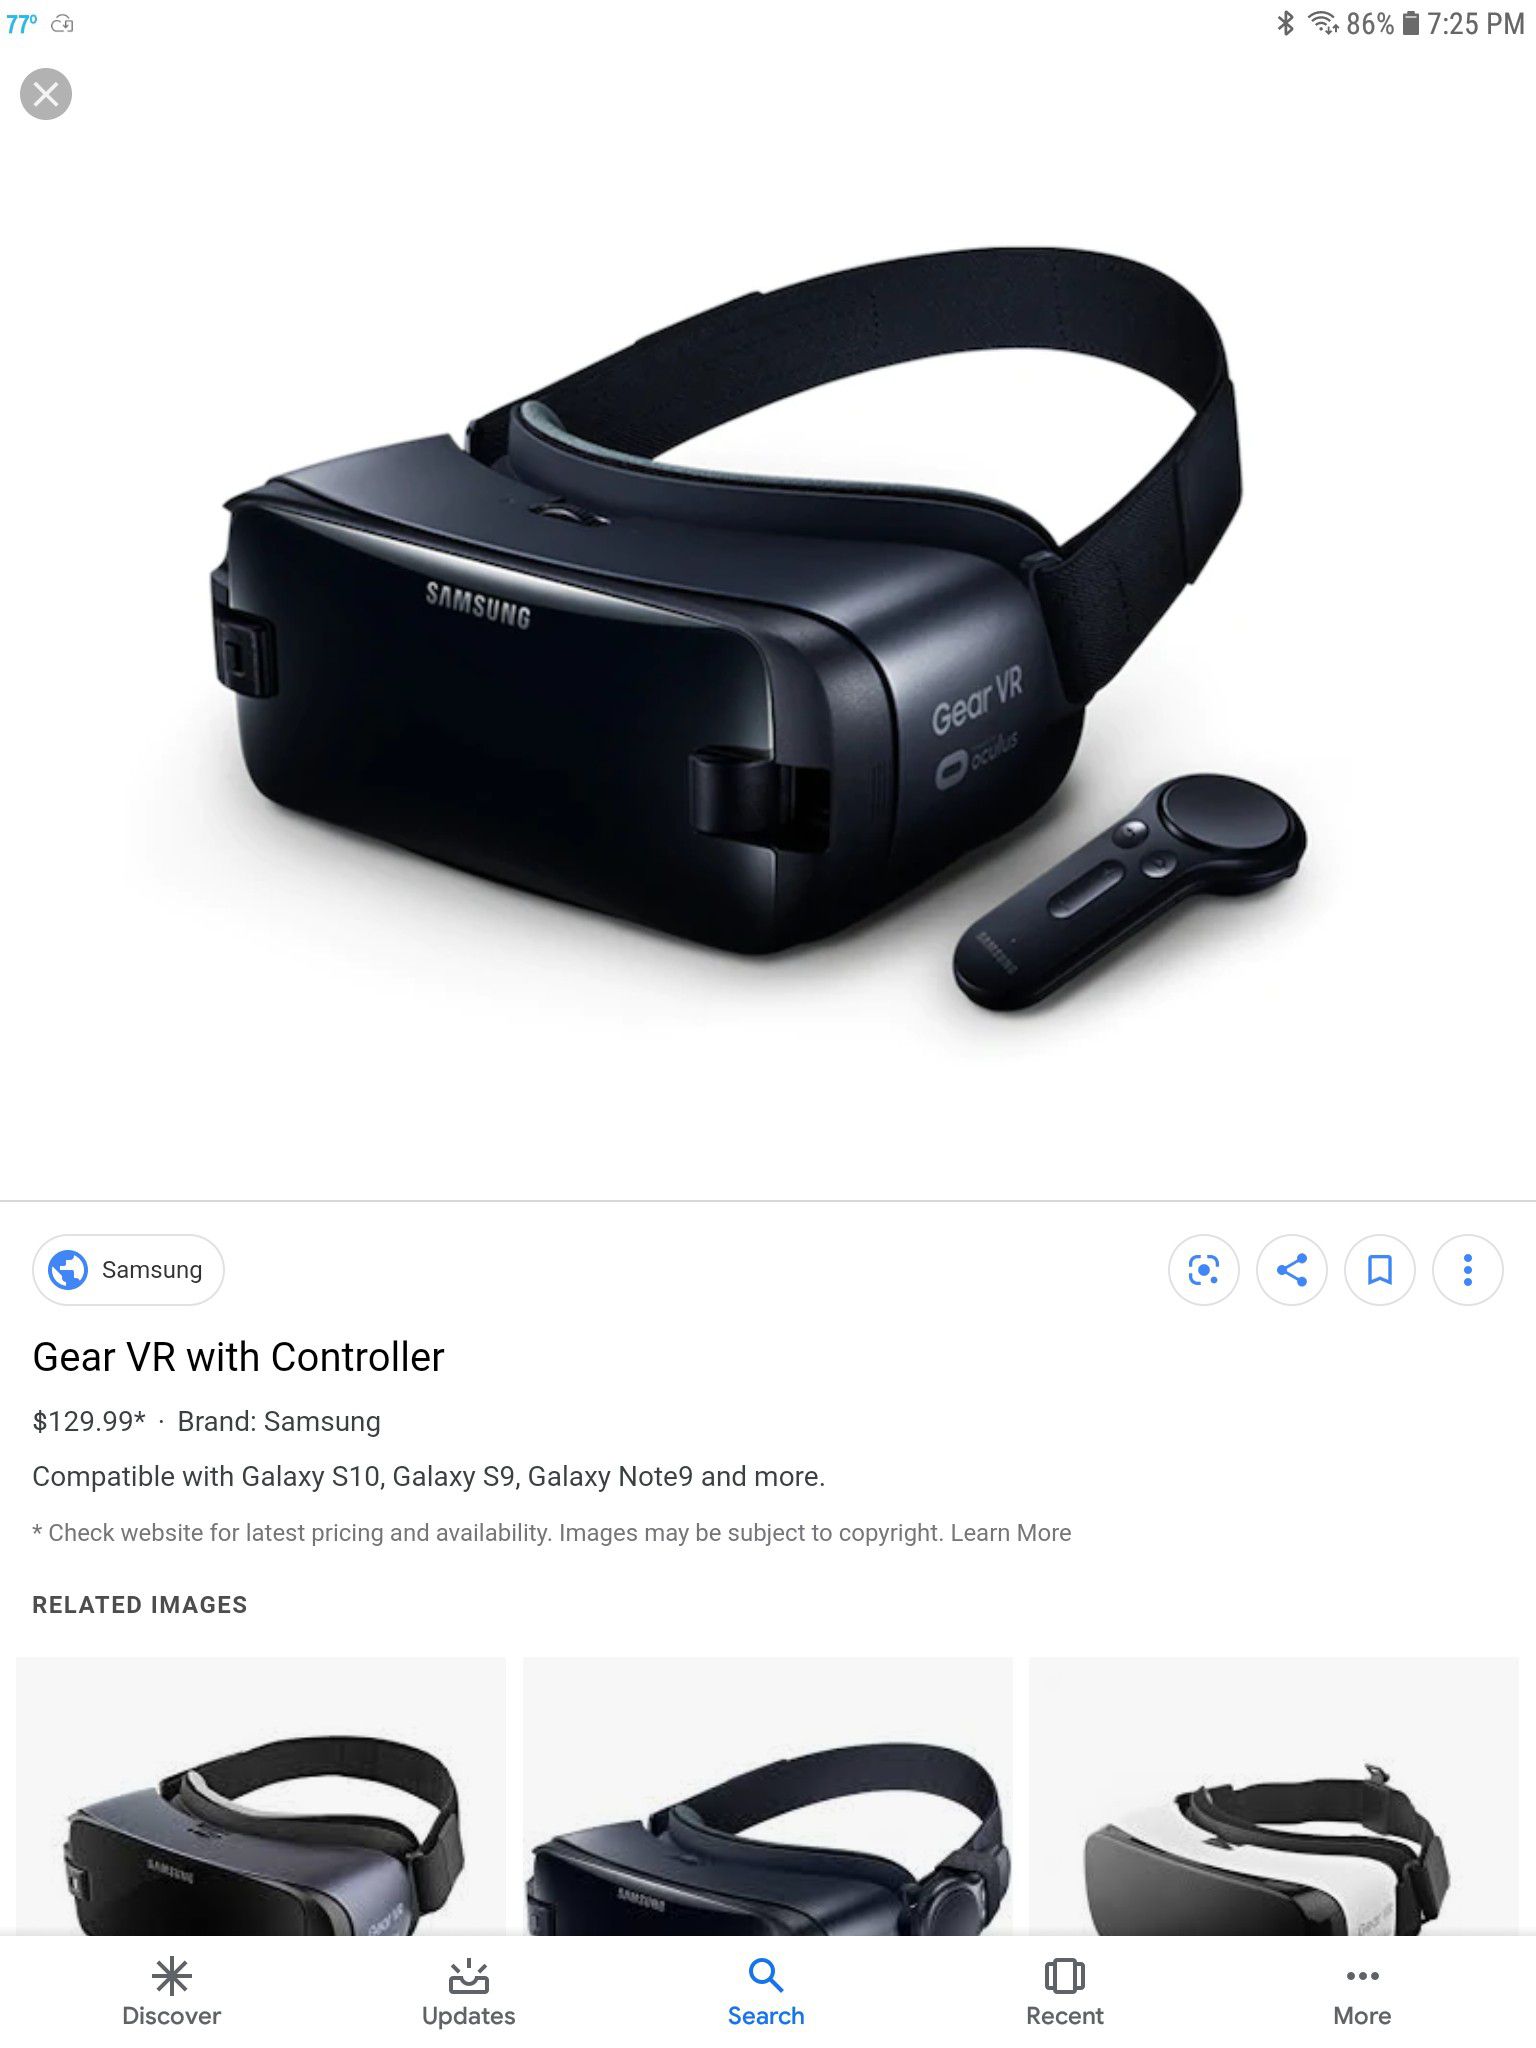 Samsung Gear VR with controller 2 for sale one used one new